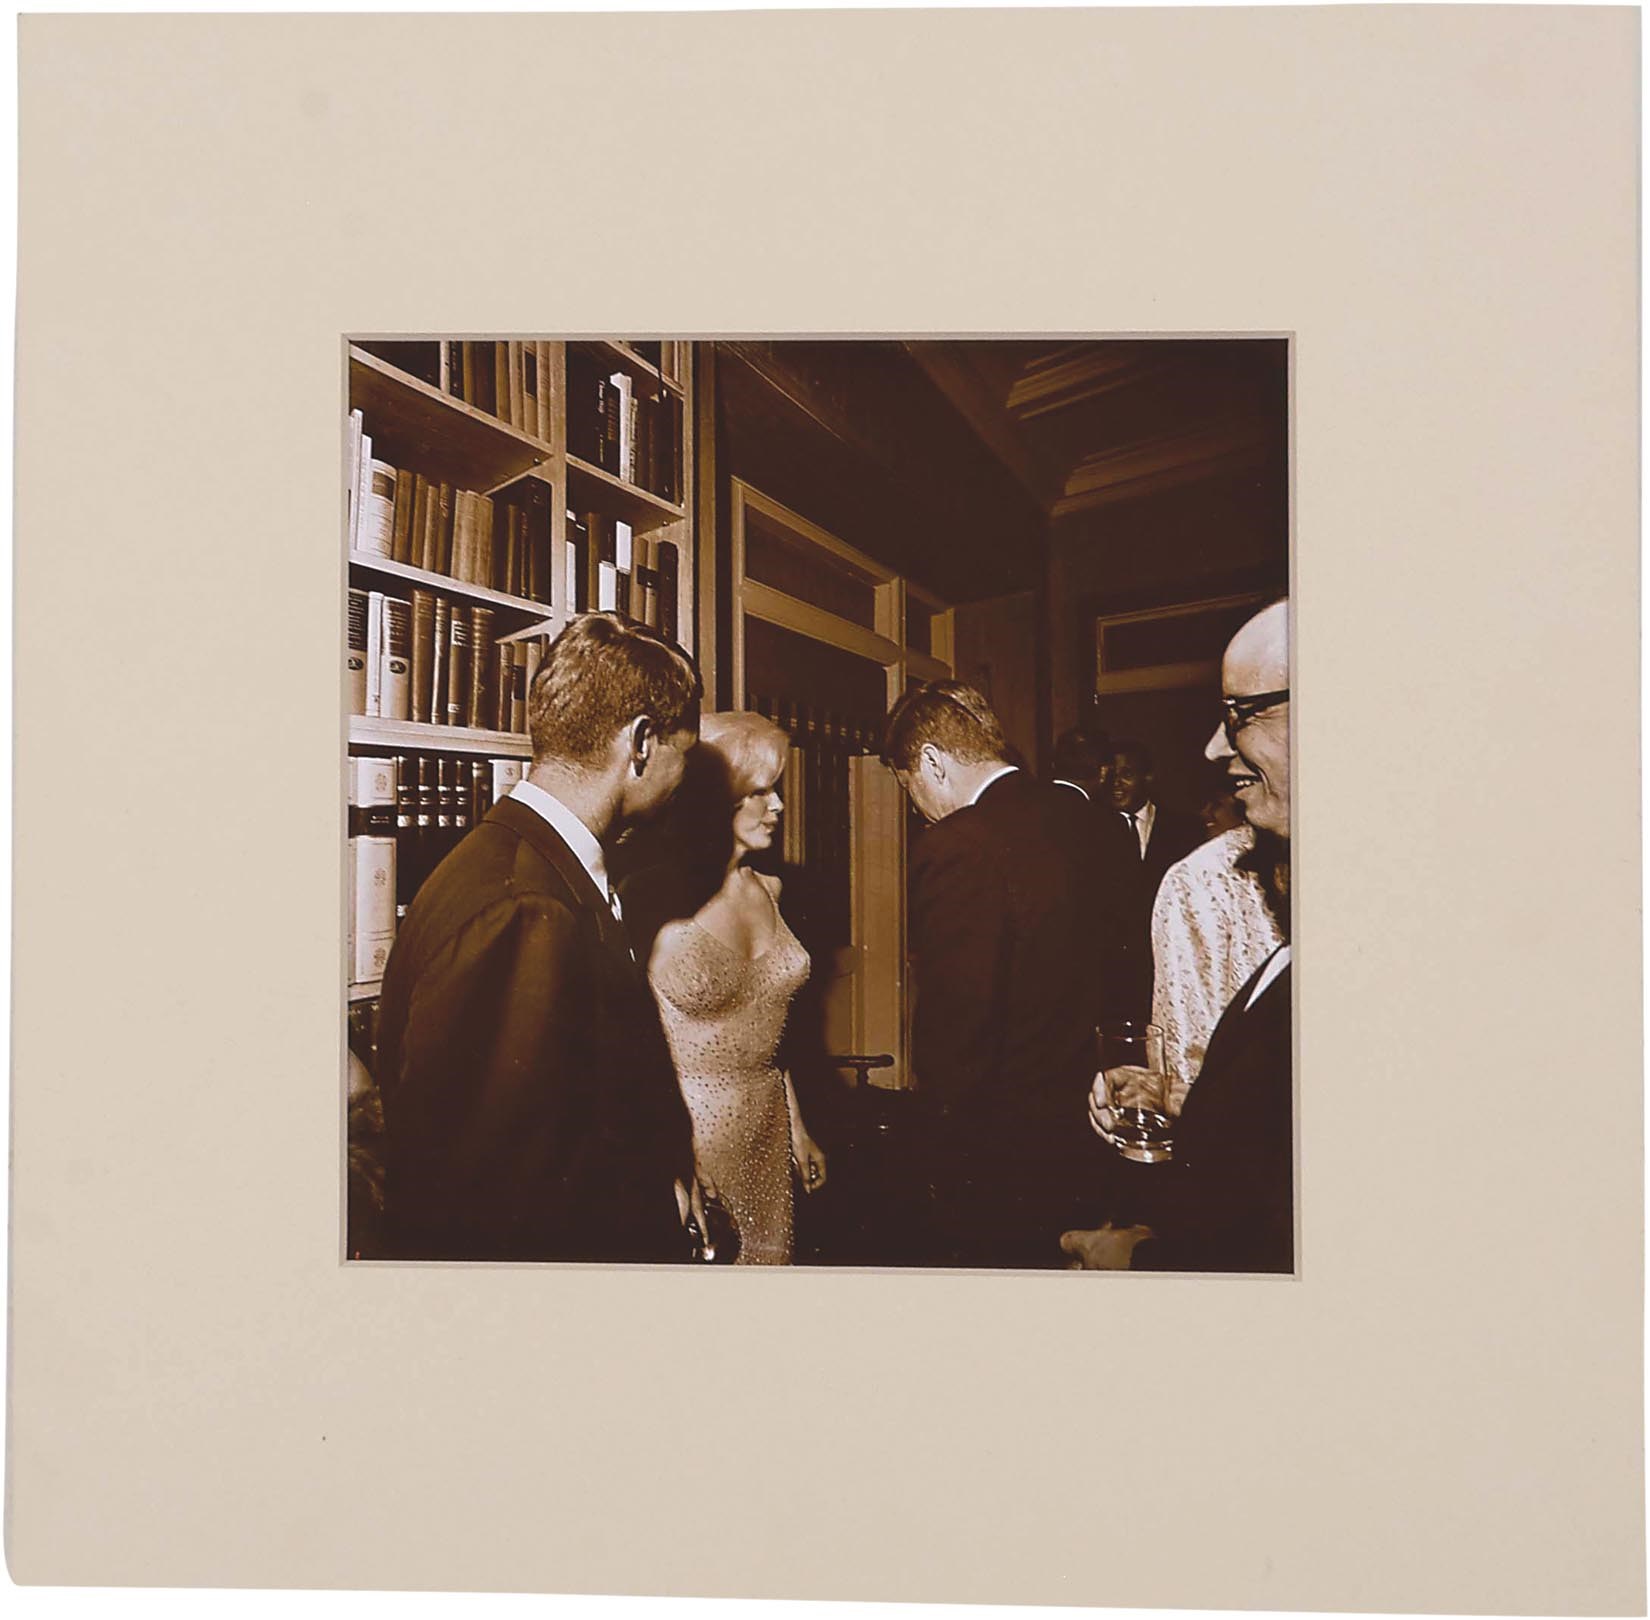 - Only Known Photograph of JFK & Marilyn - from Official JFK White House Photographer Cecil W. Stoughton